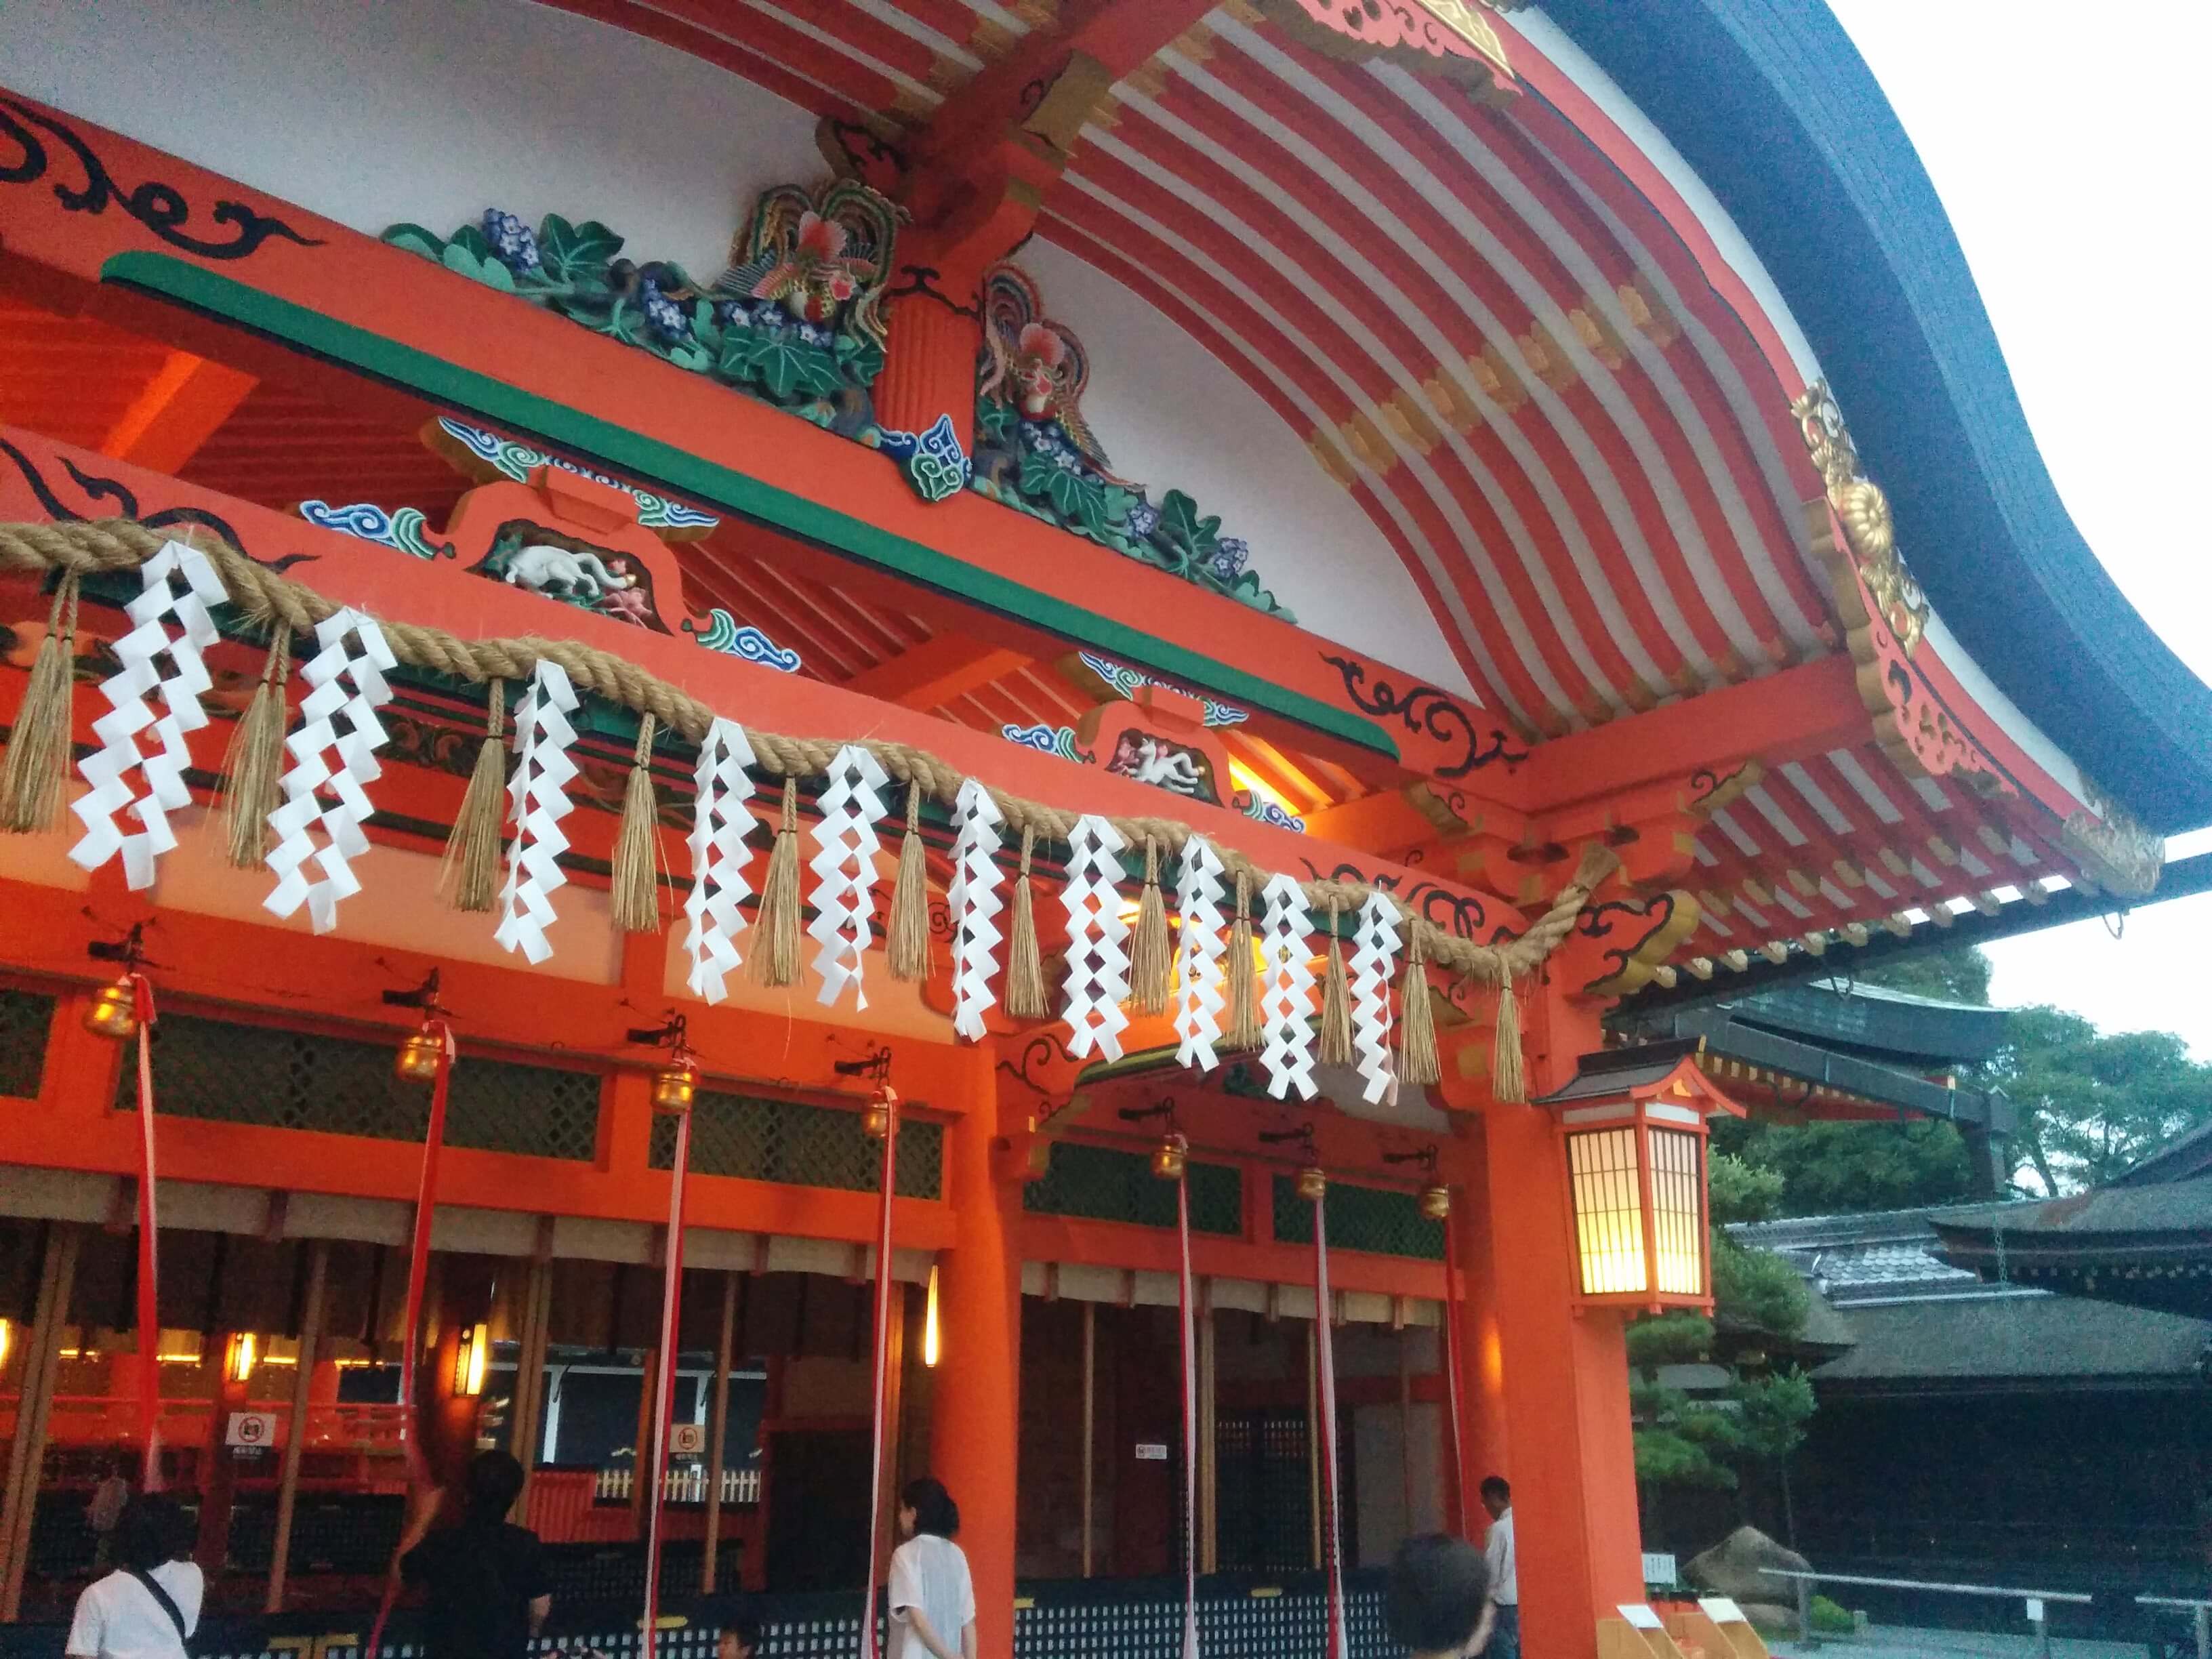 A temple in Kyoto